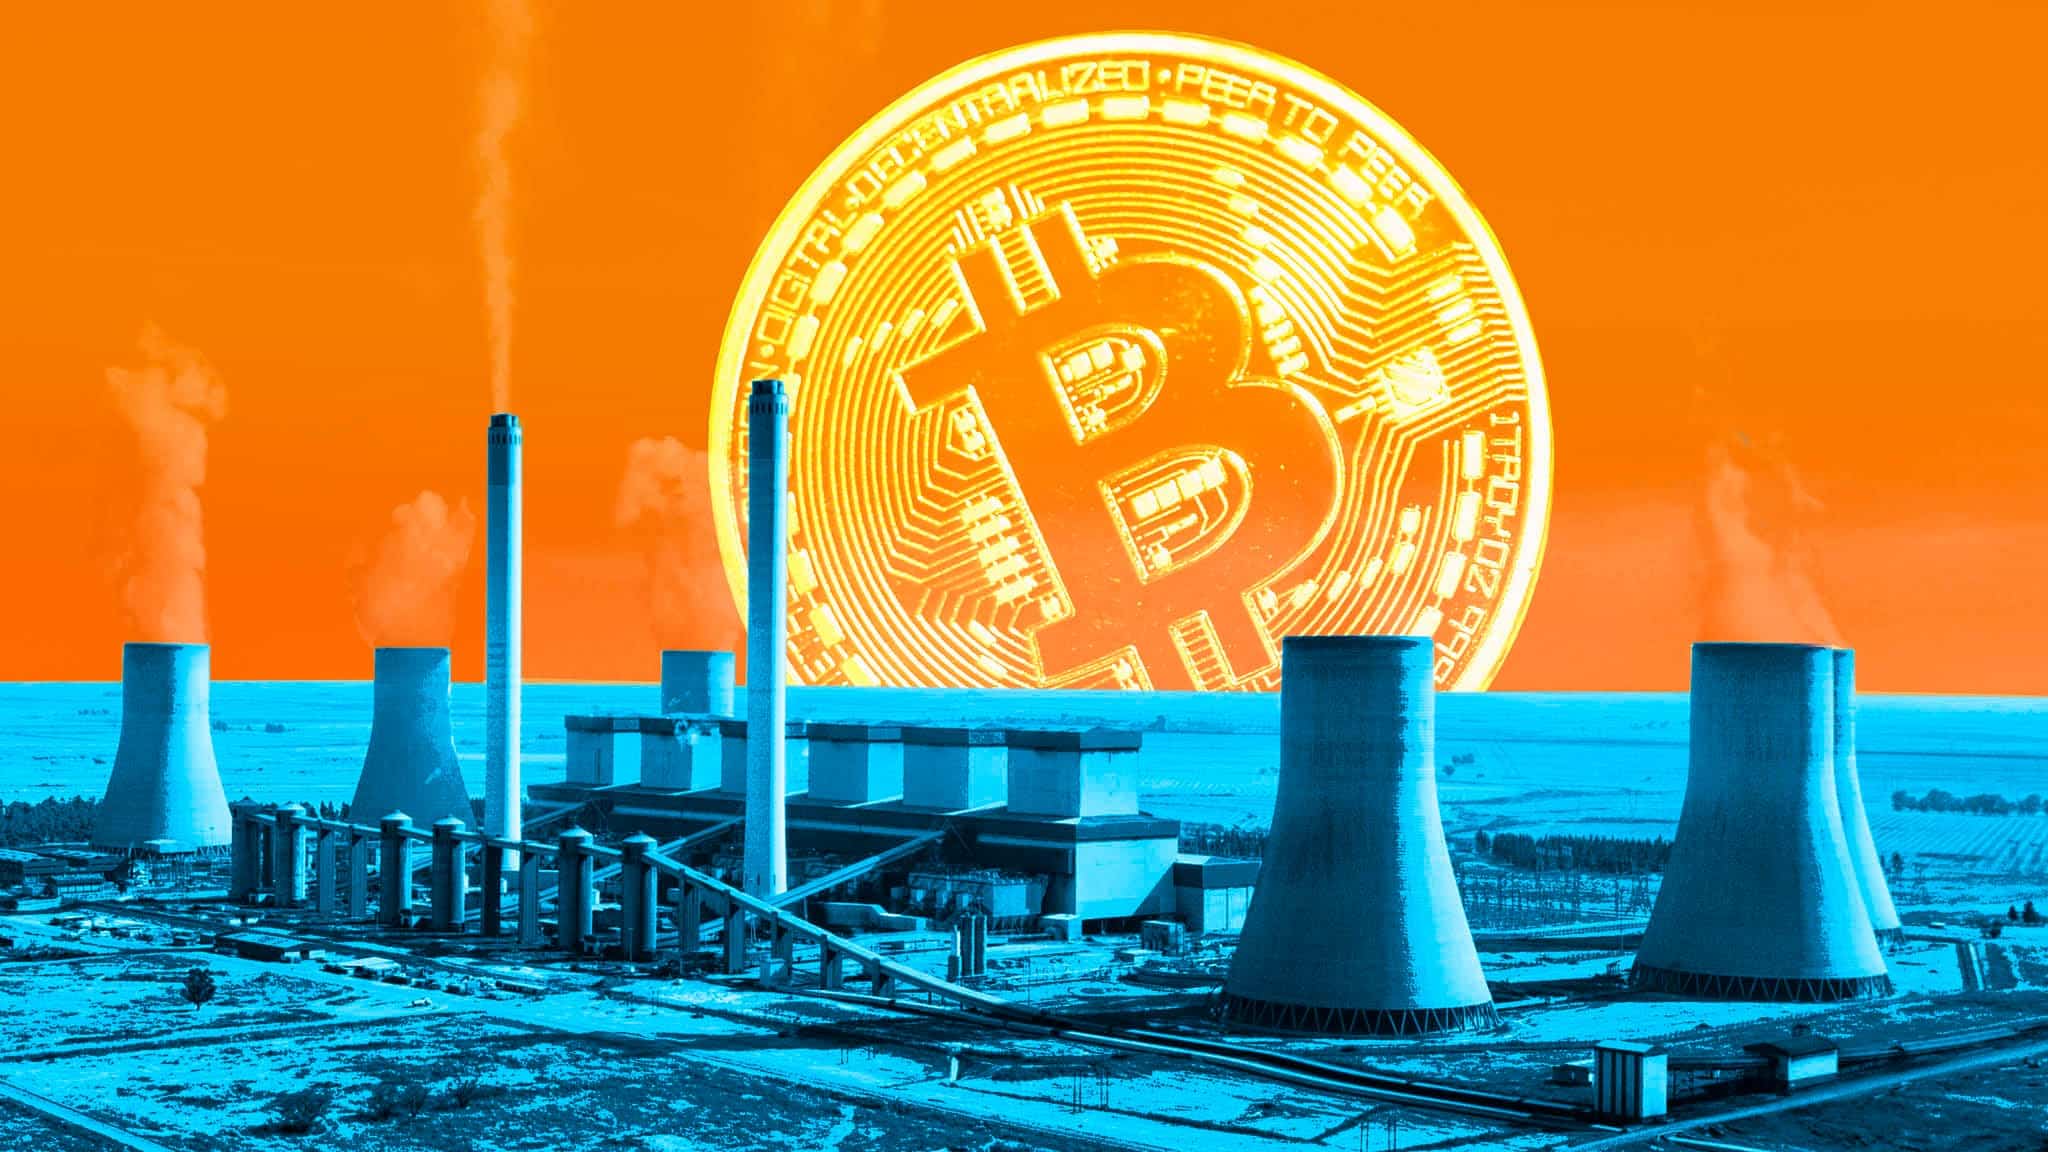 Bitcoin (BTC) is the worst cryptocurrency for the environment, study shows  - Cointribune